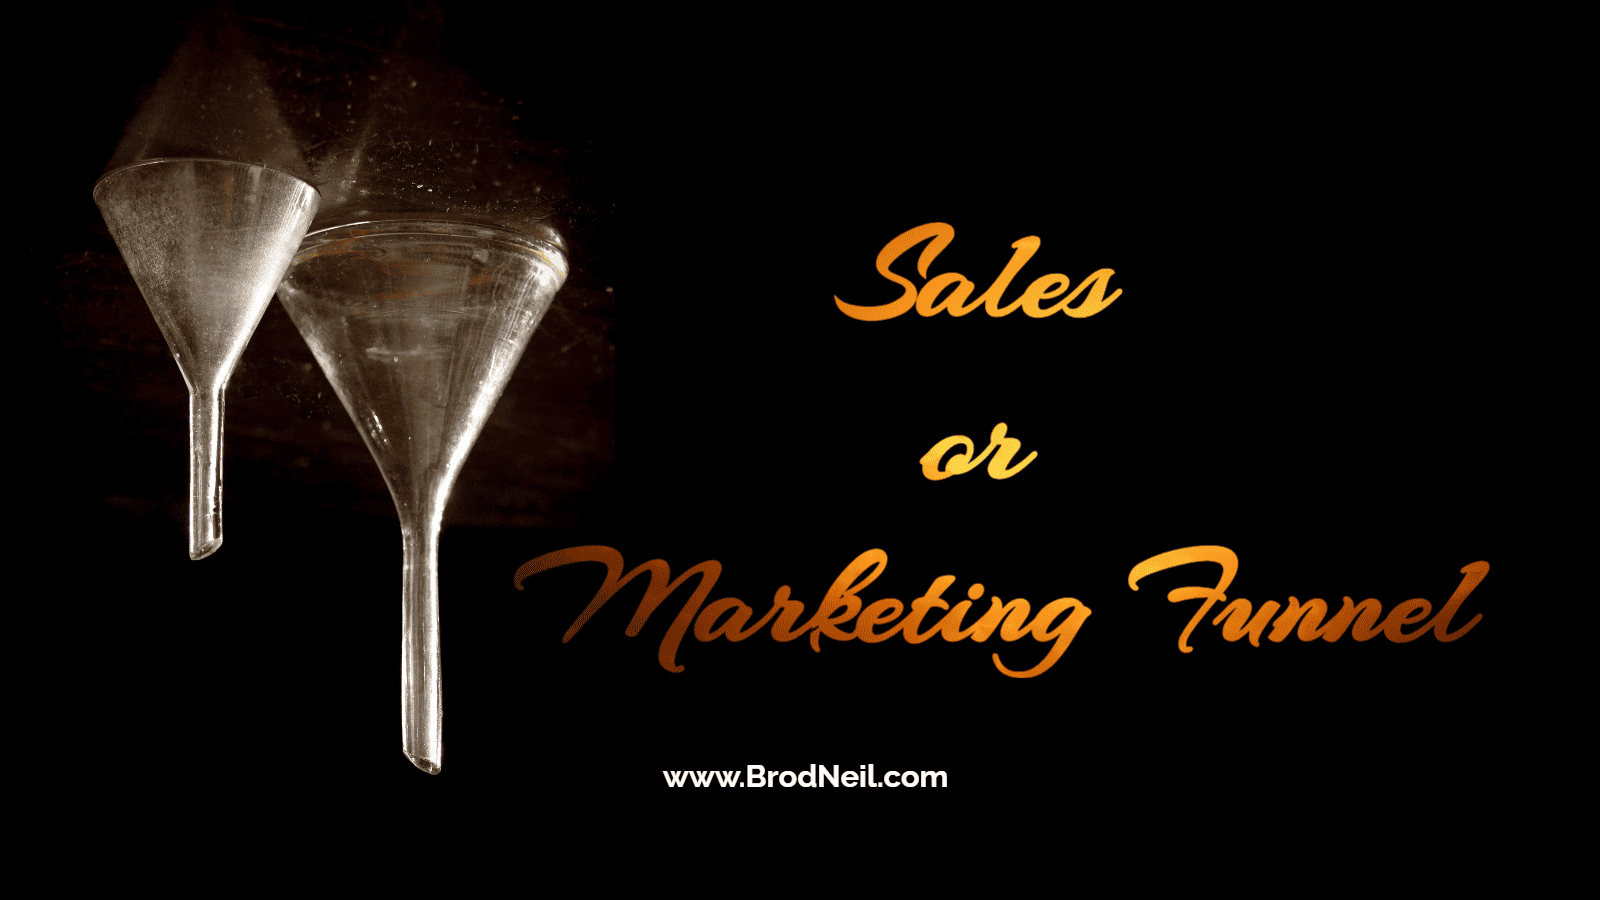 Sales or Marketing Funnel